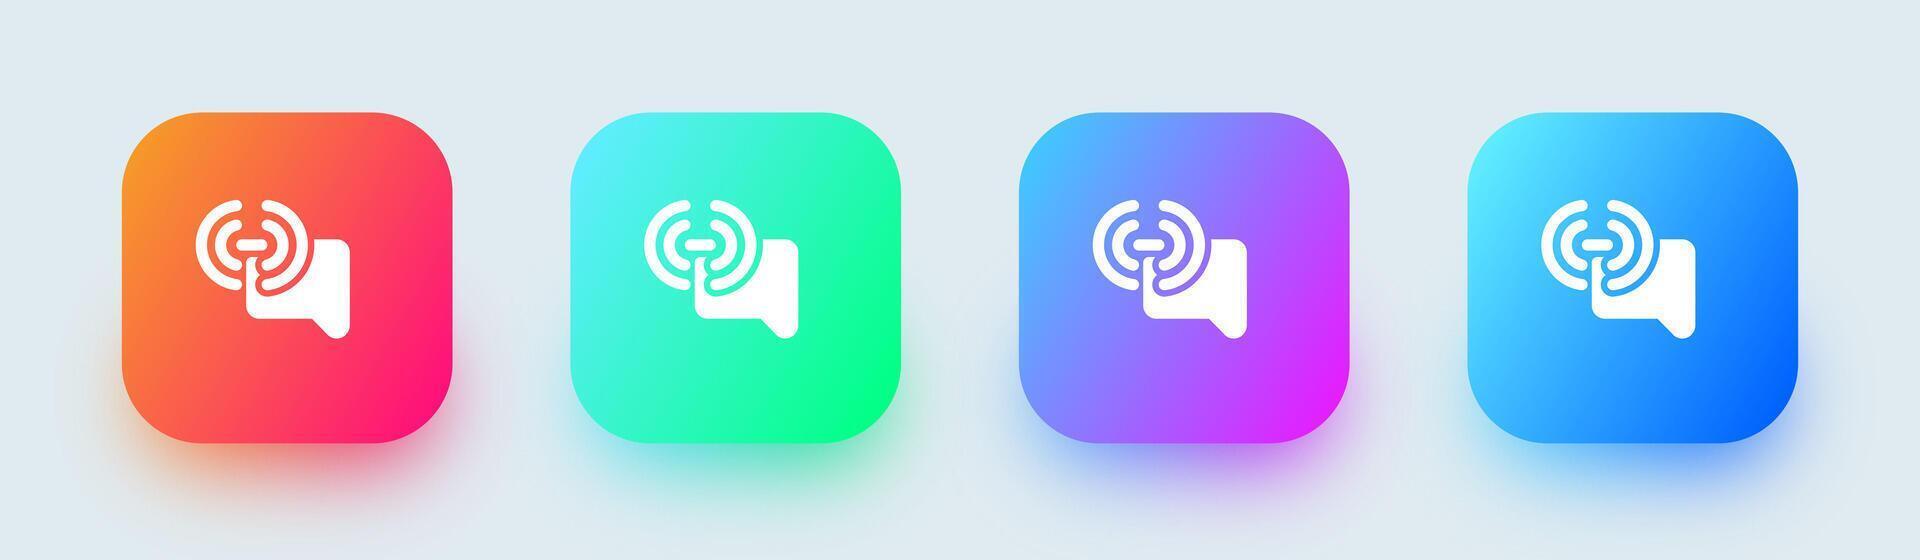 Broadcast channel solid icon in square gradient colors. Chat group signs vector illustration.